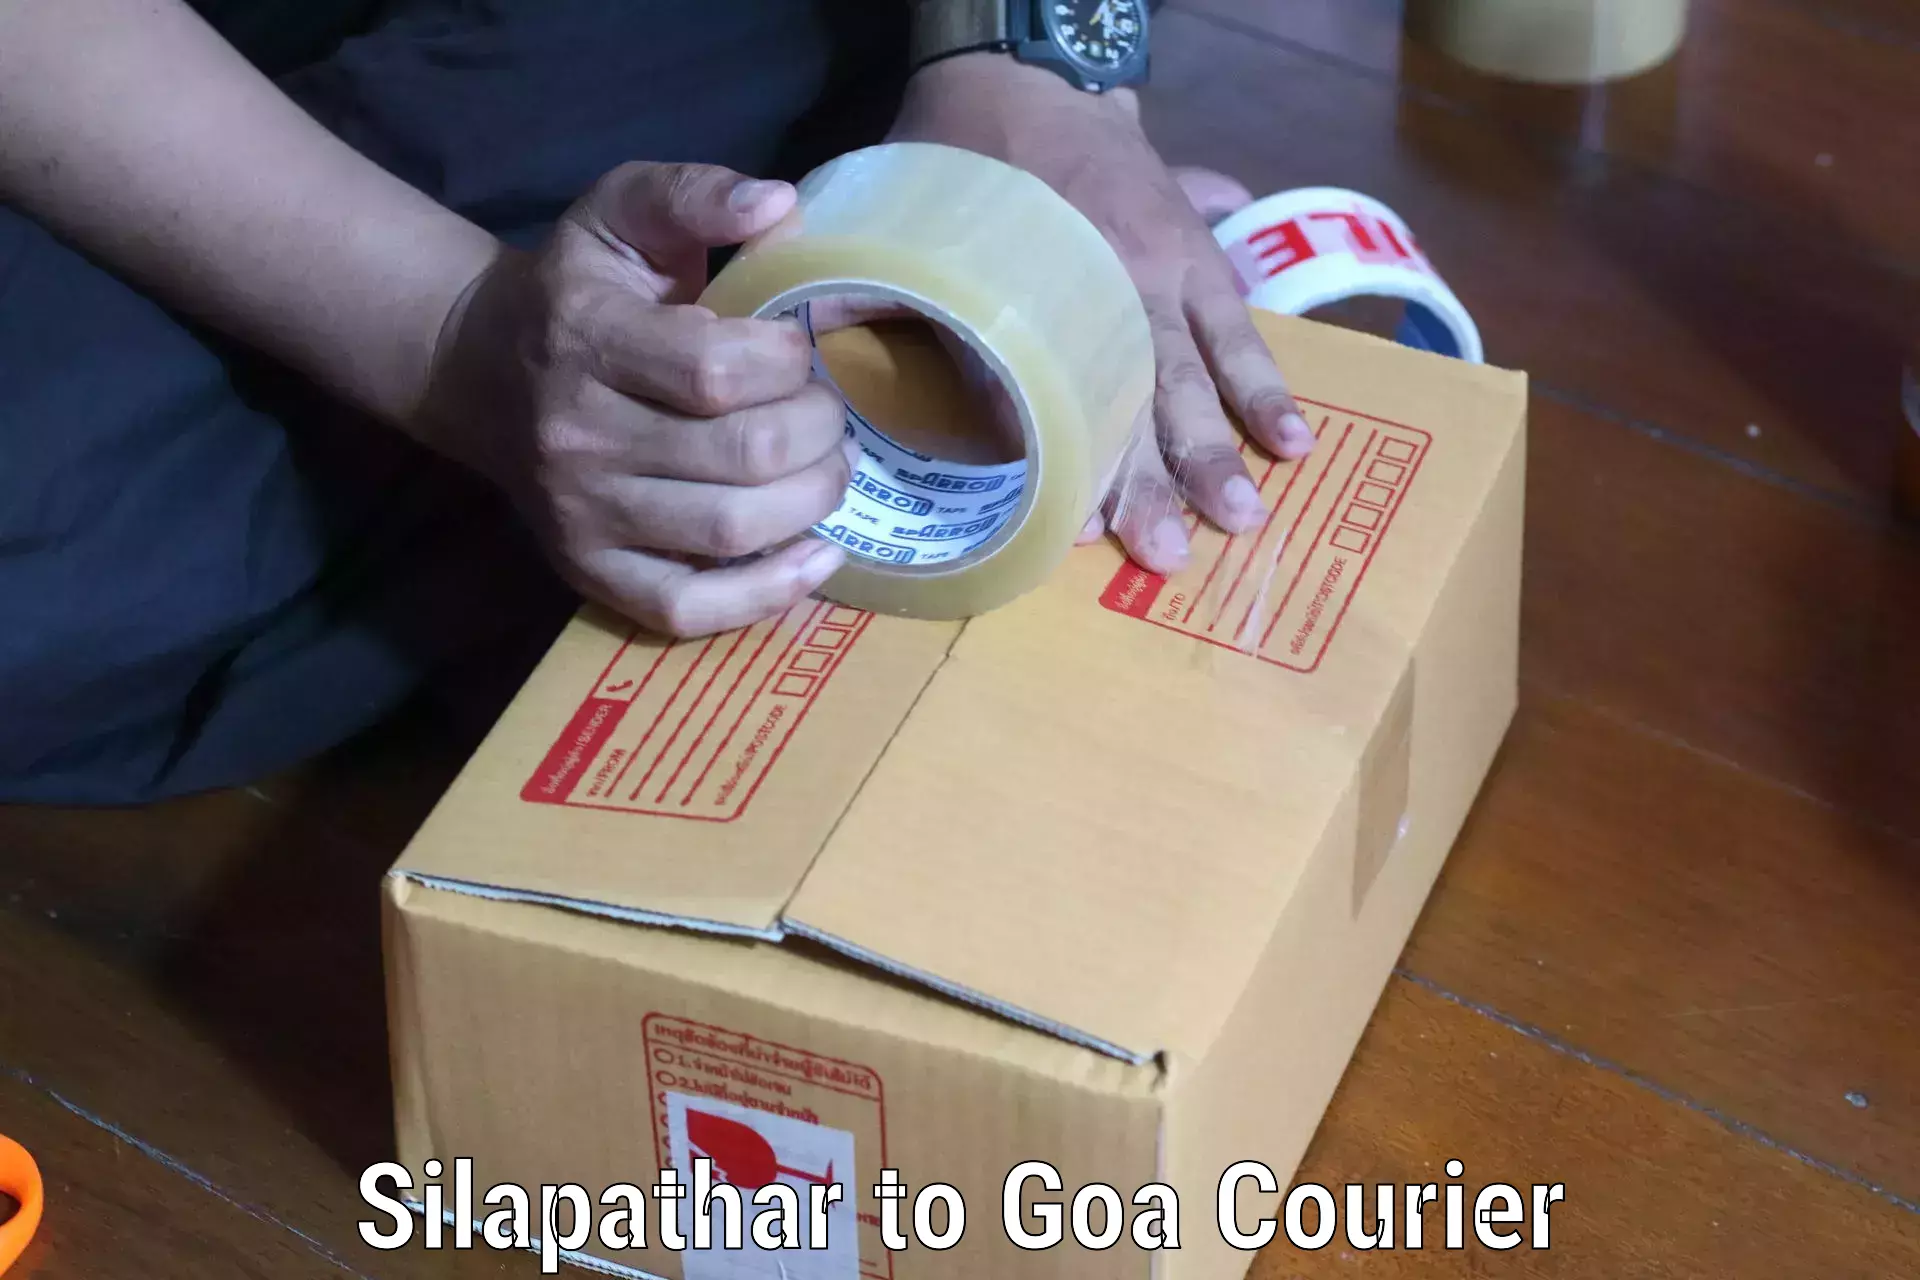 Global parcel delivery Silapathar to Panaji